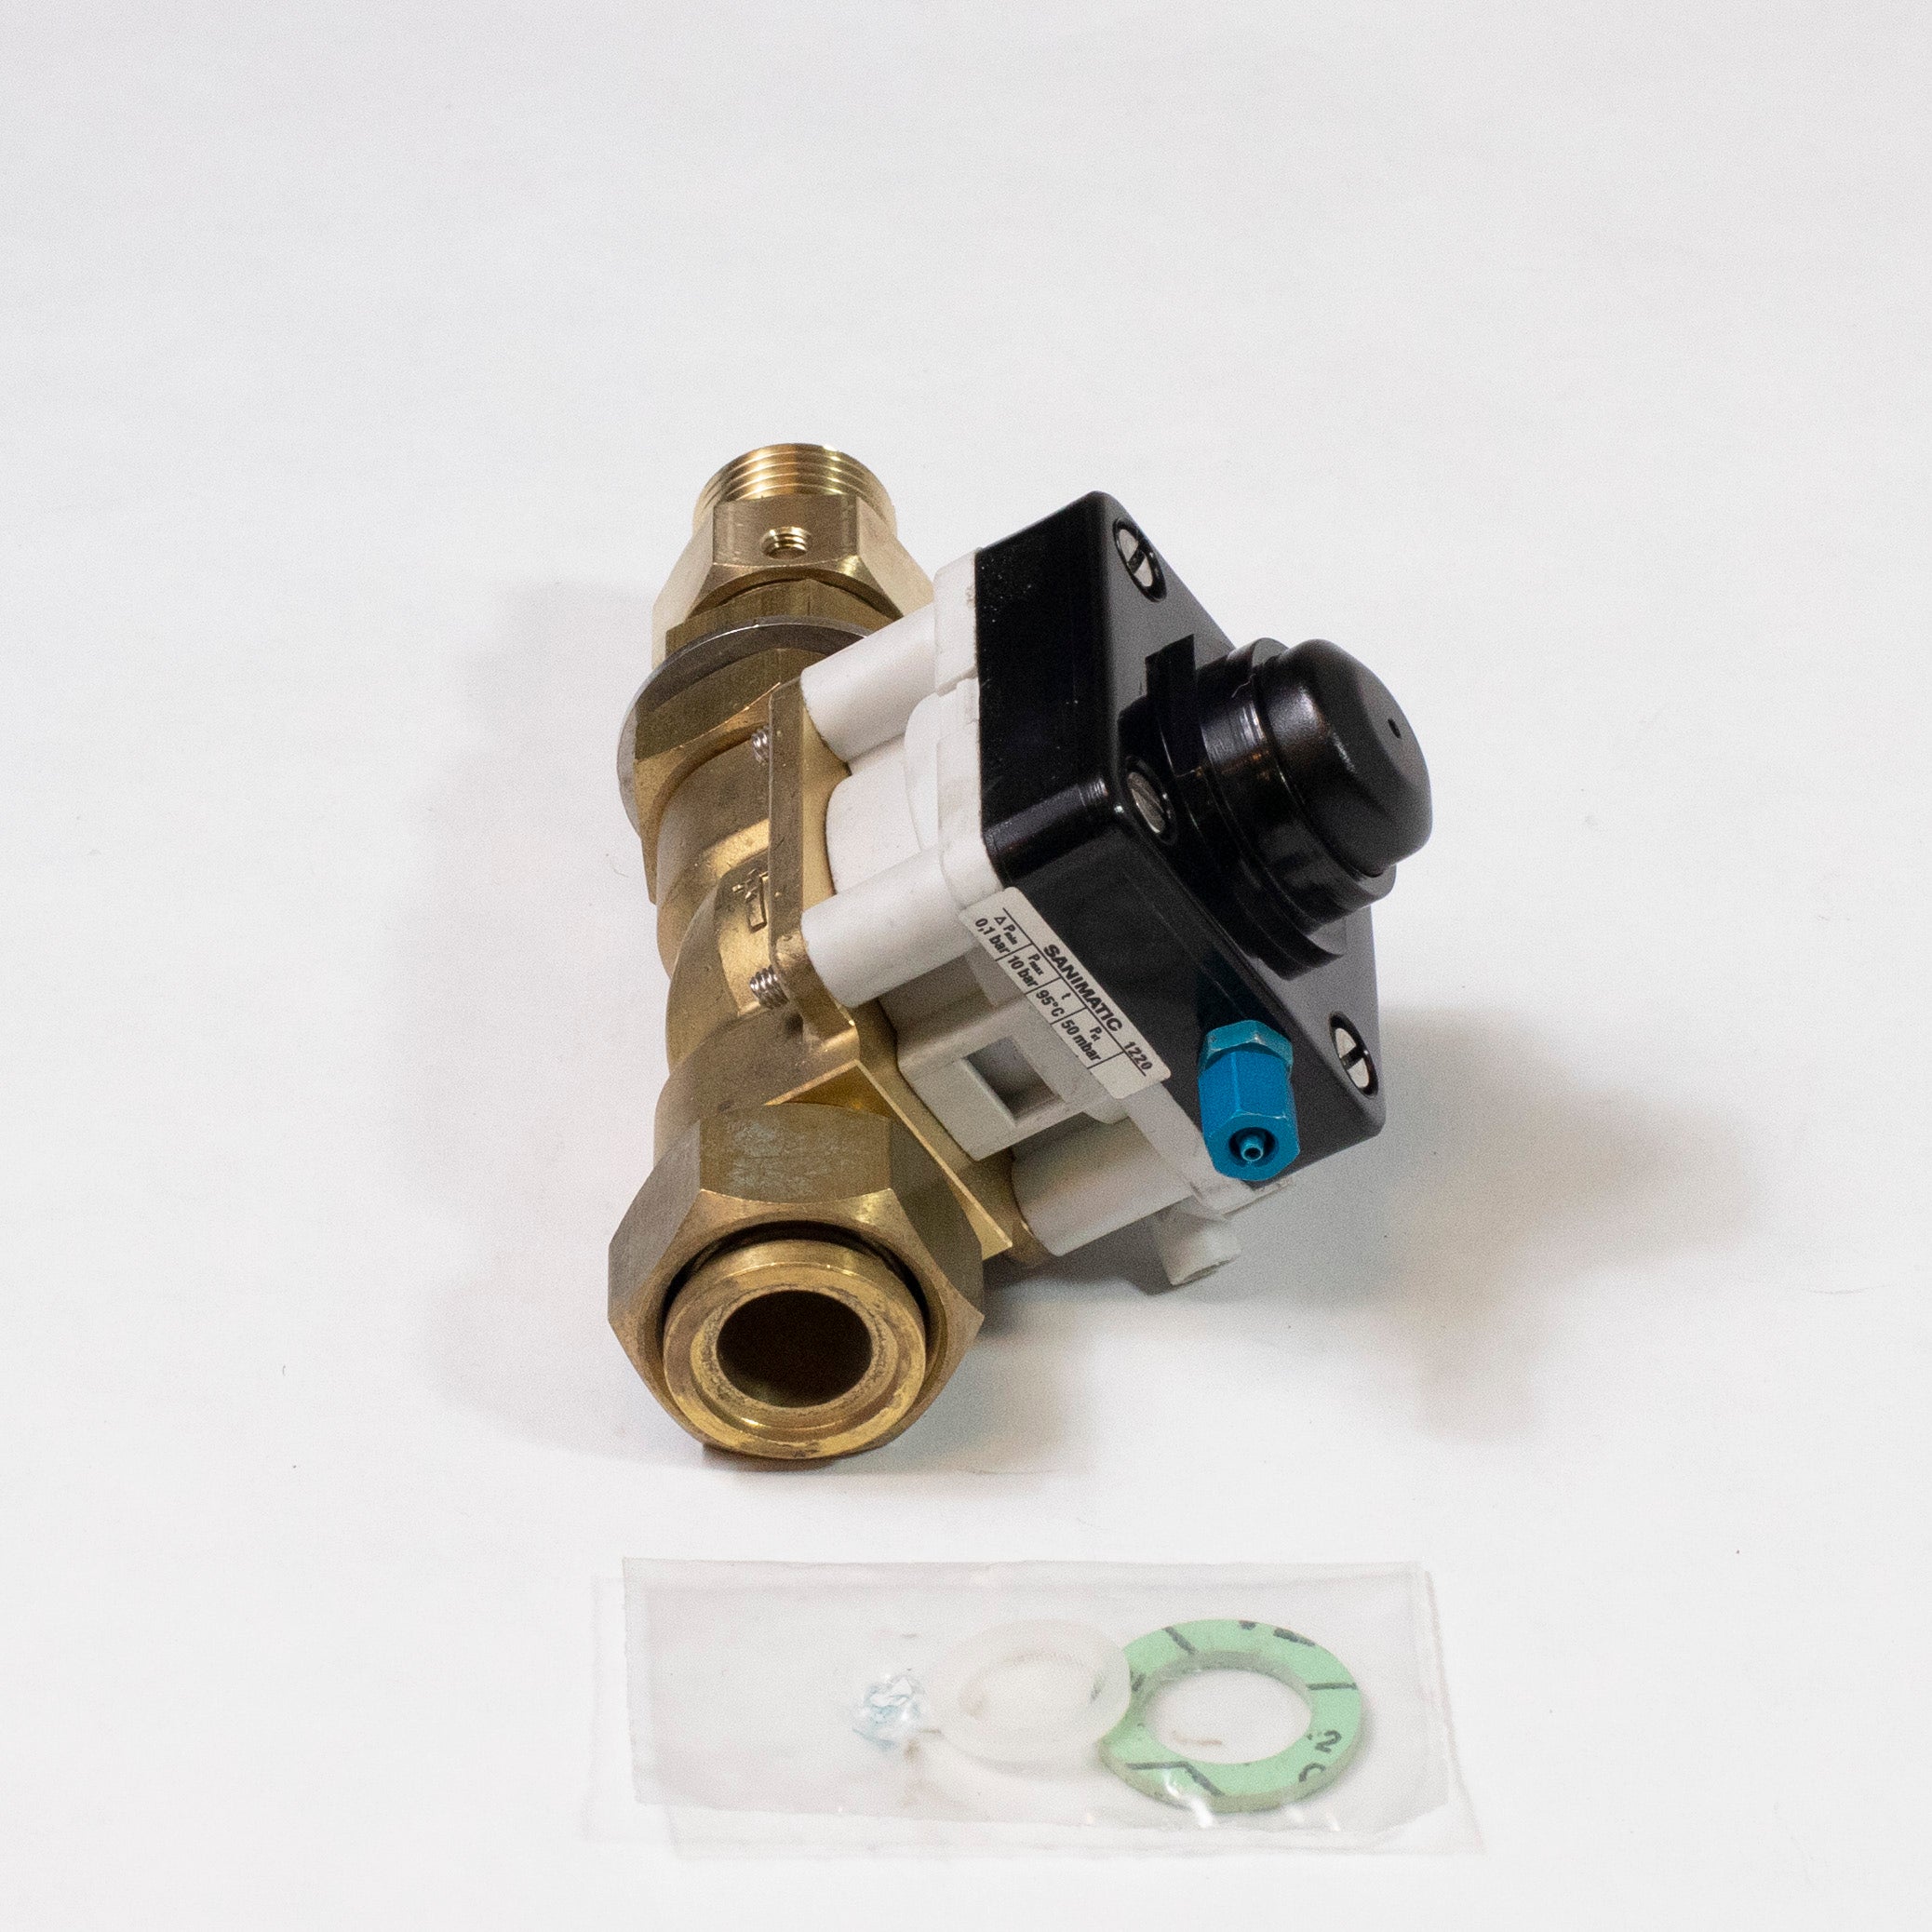 P5020 - Valve for Footrail Operated Intersan/AquaDesign Washfountains